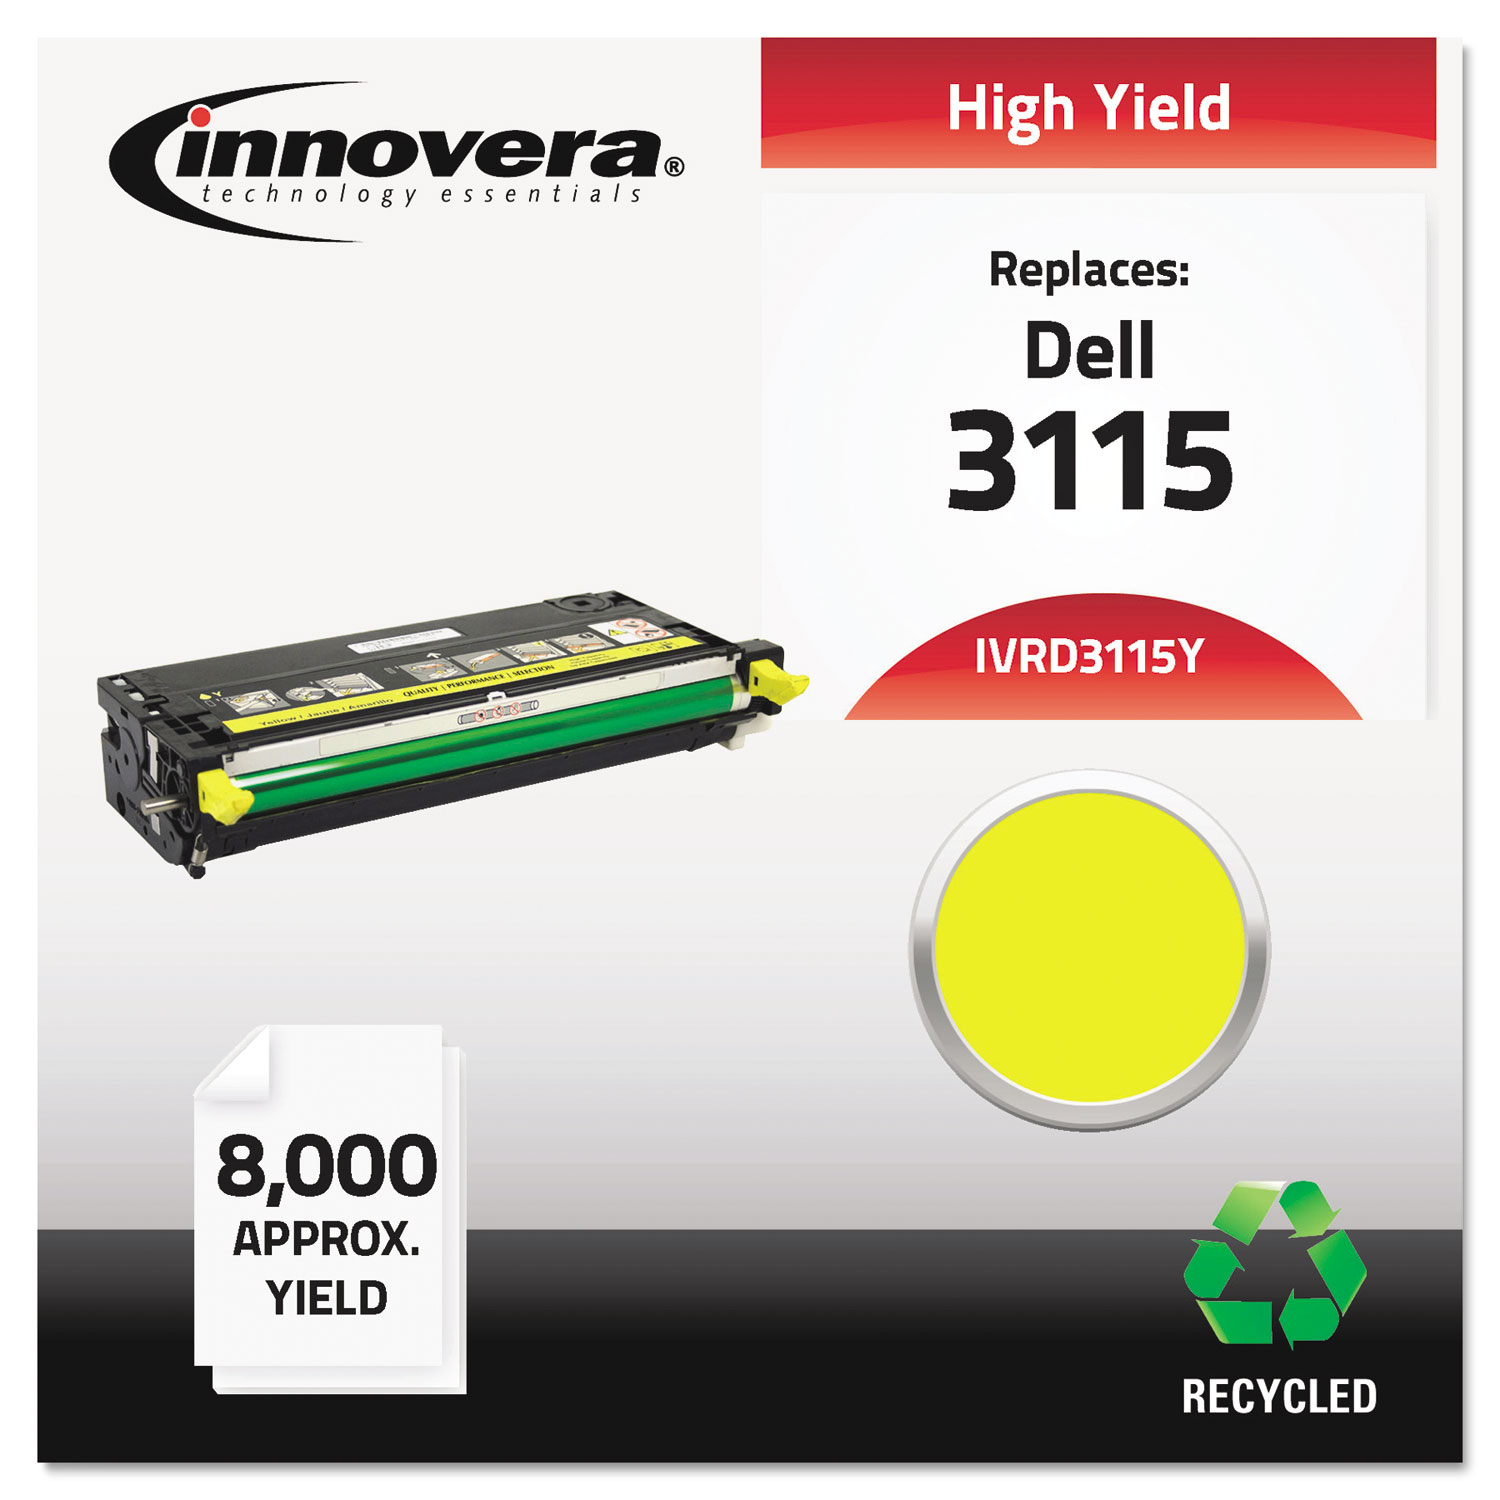  Innovera IVRD3115Y Remanufactured 310-8401 (3115) High-Yield Toner, 8000 Page-Yield, Yellow (IVRD3115Y) 